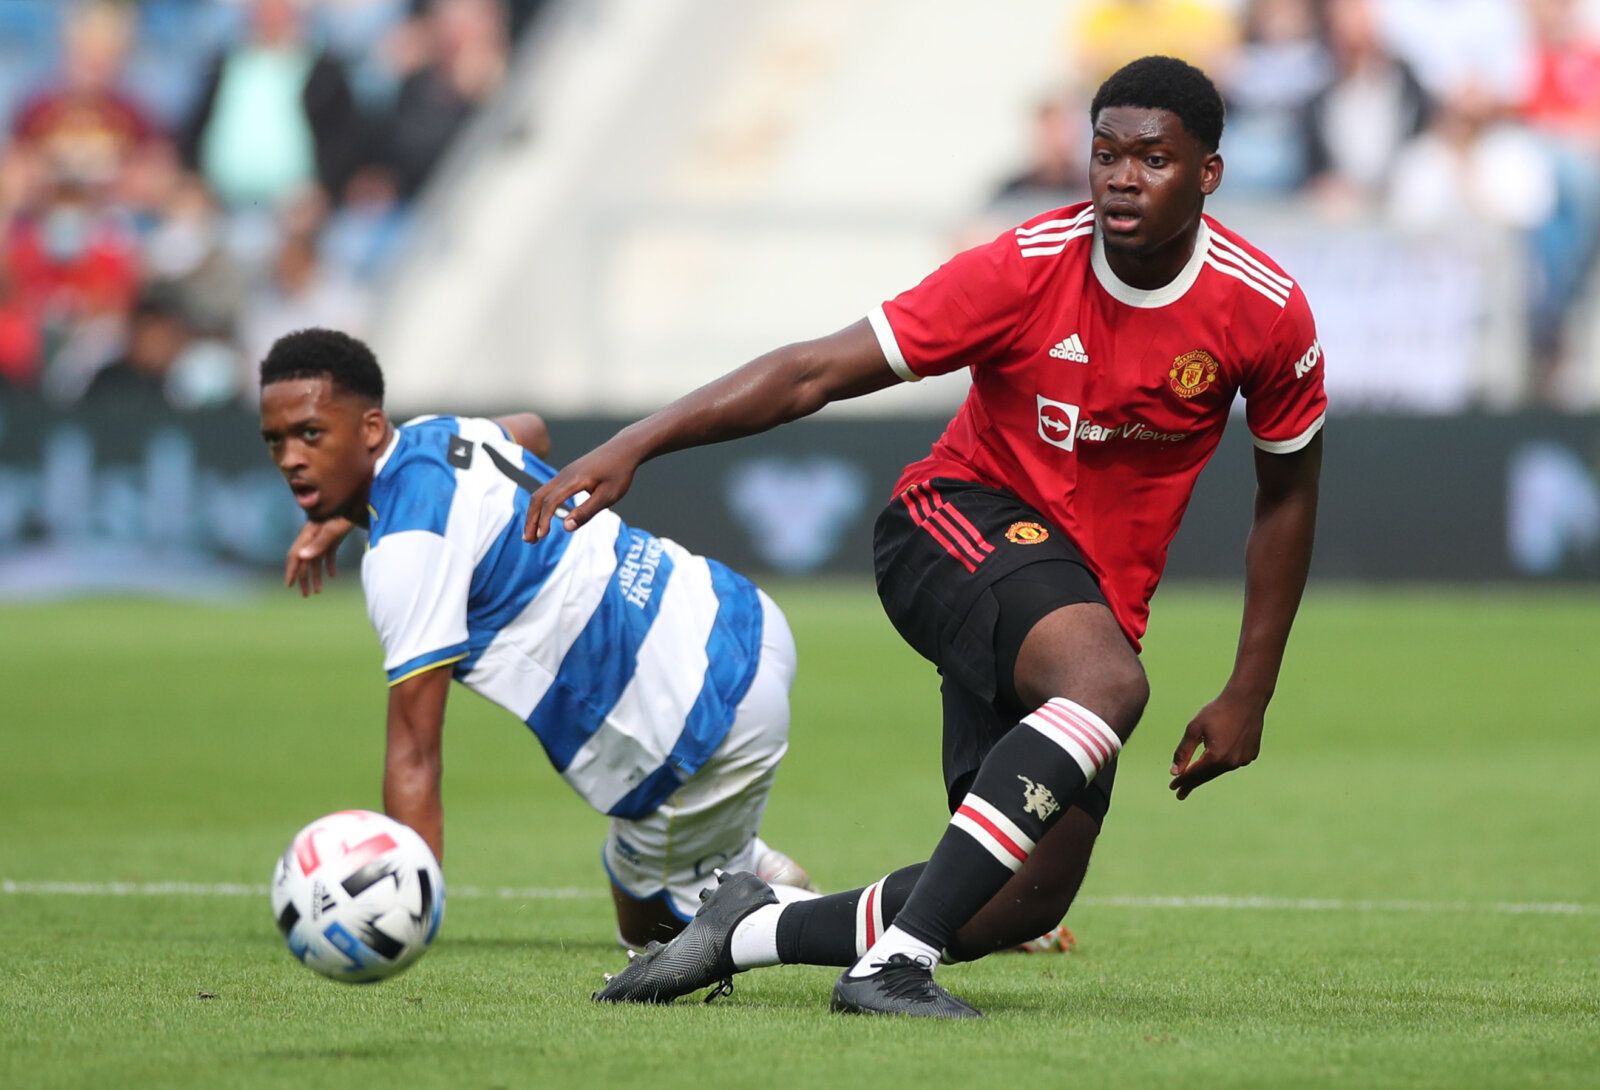 Soccer Football - Pre Season Friendly - Queens Park Rangers v Manchester United - Loftus Road. London, Britain - July 24, 2021 Manchester United's Teden Mengi in action with Queens Park Rangers' Chris Willock Action Images via Reuters/Peter Cziborra